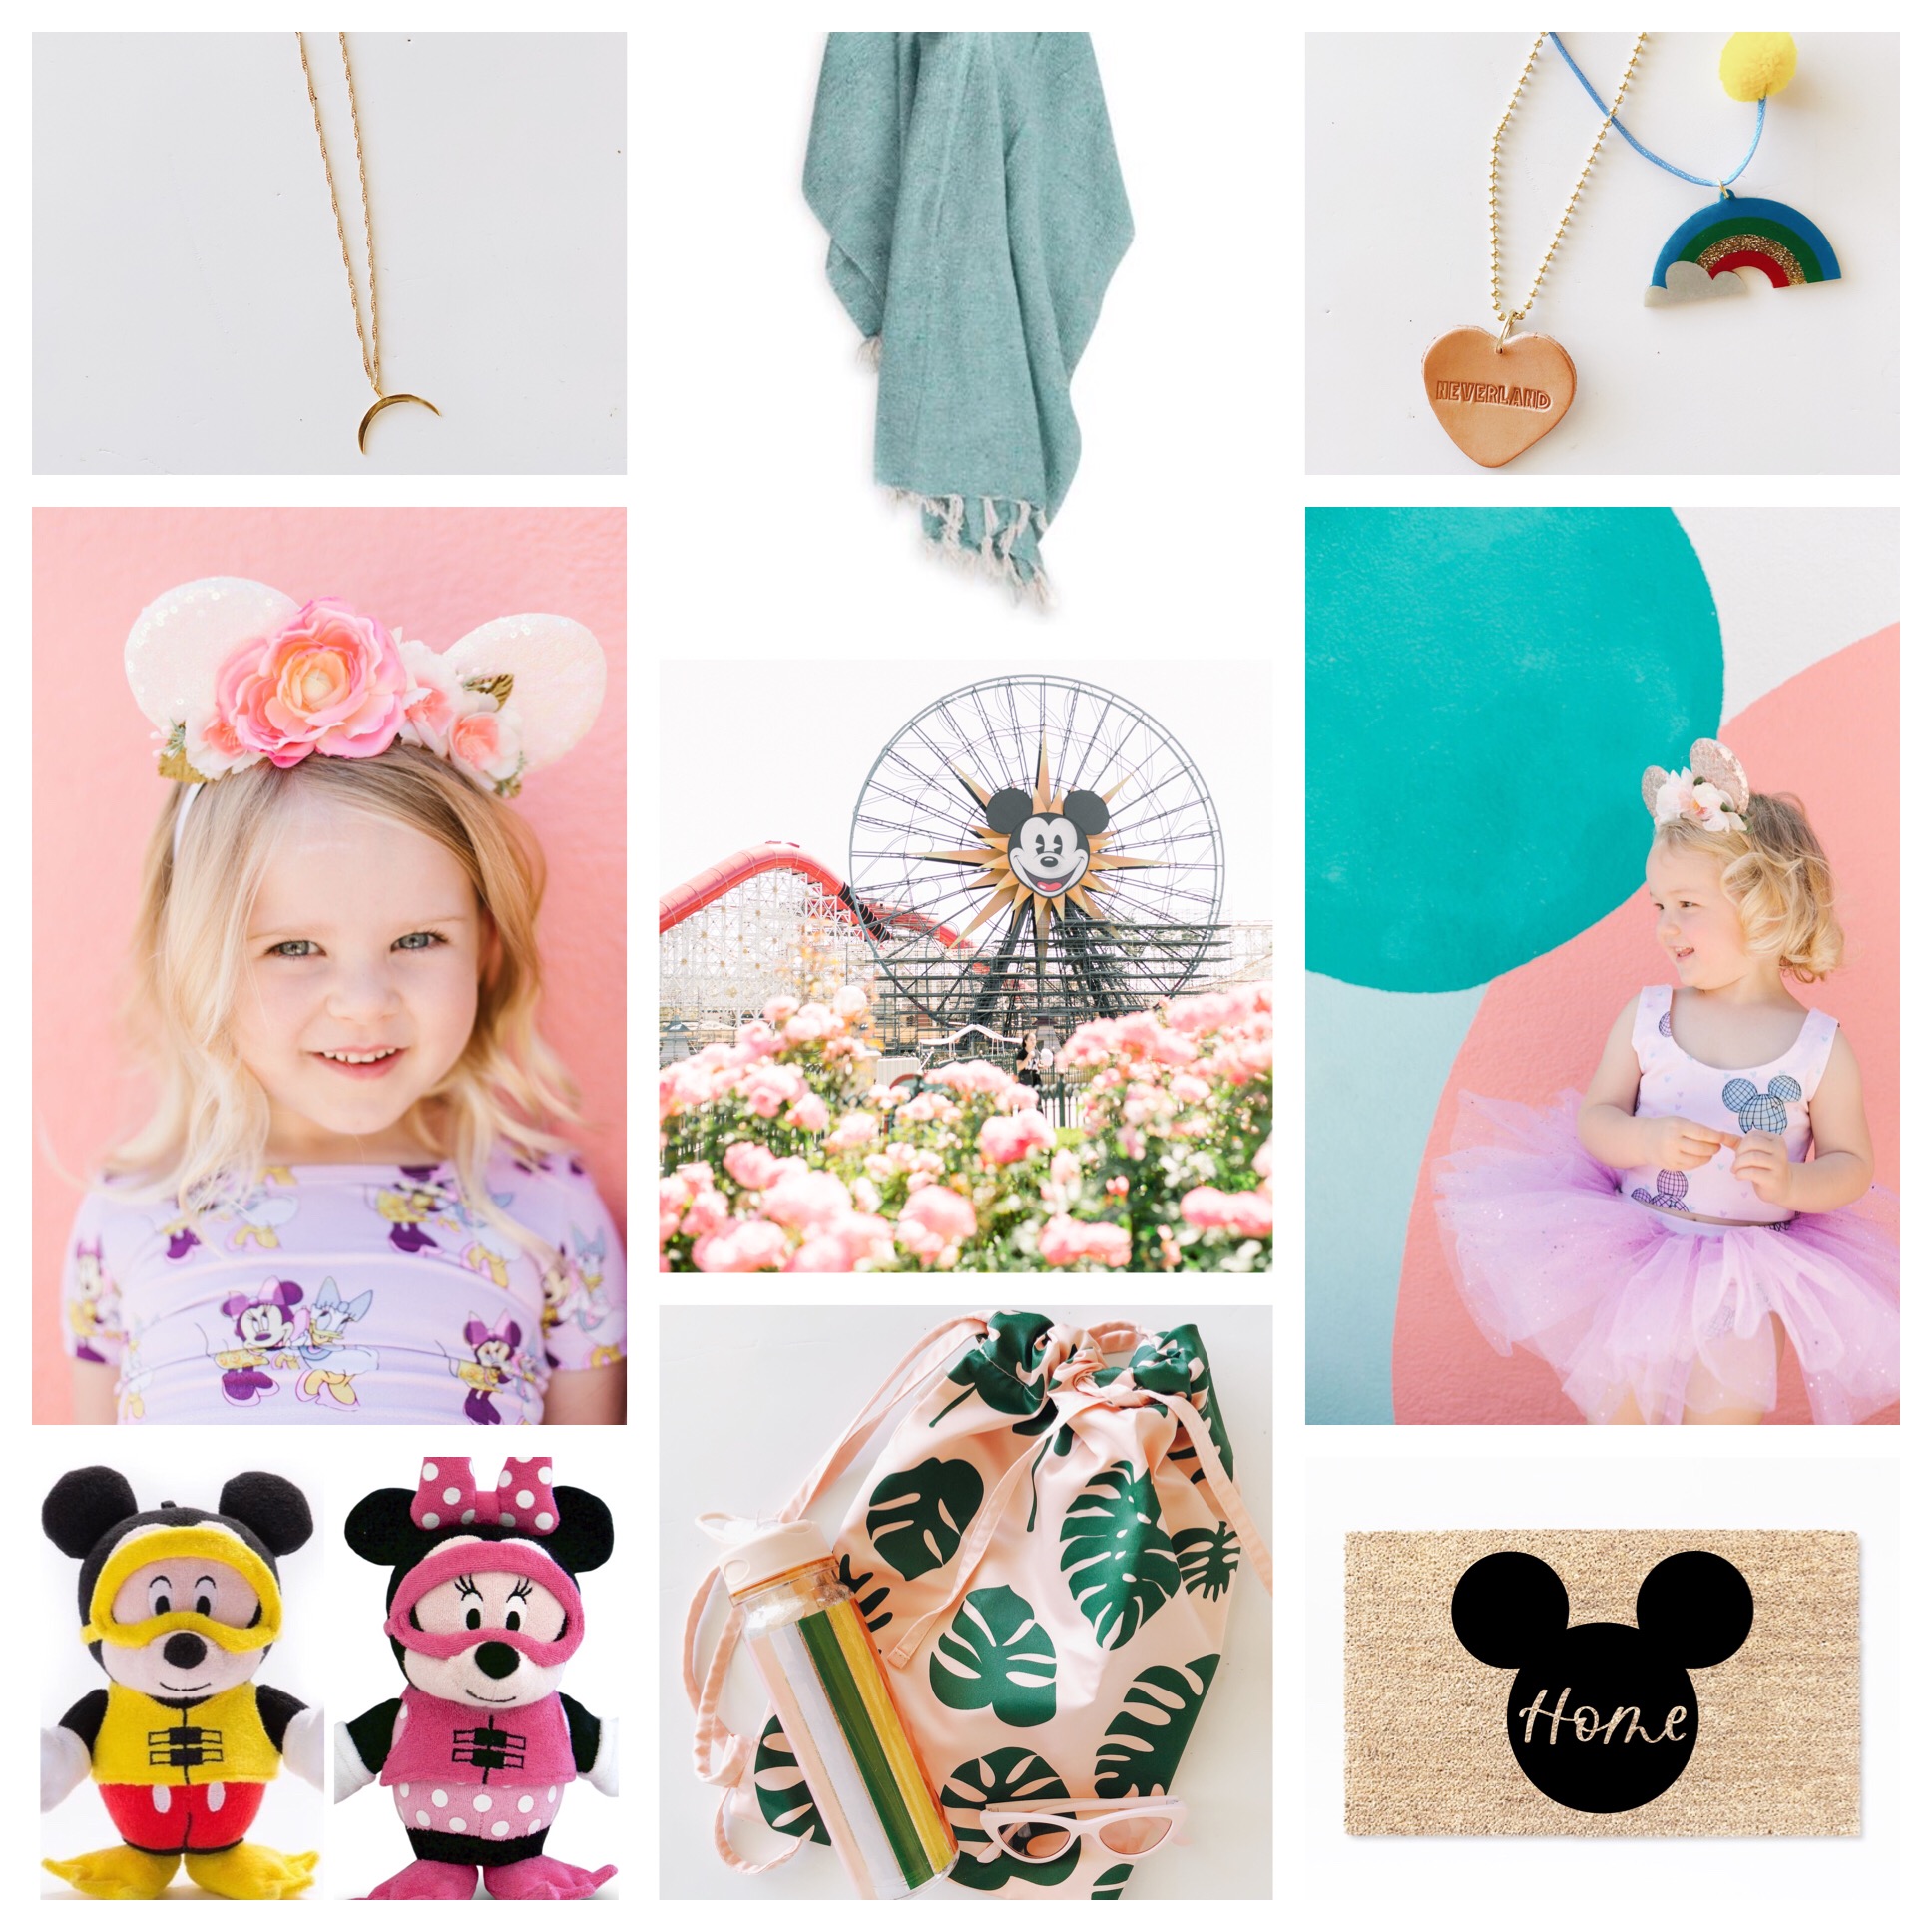 A Beijos Disneyland Giveaway You Don’t Want to Miss!!!!